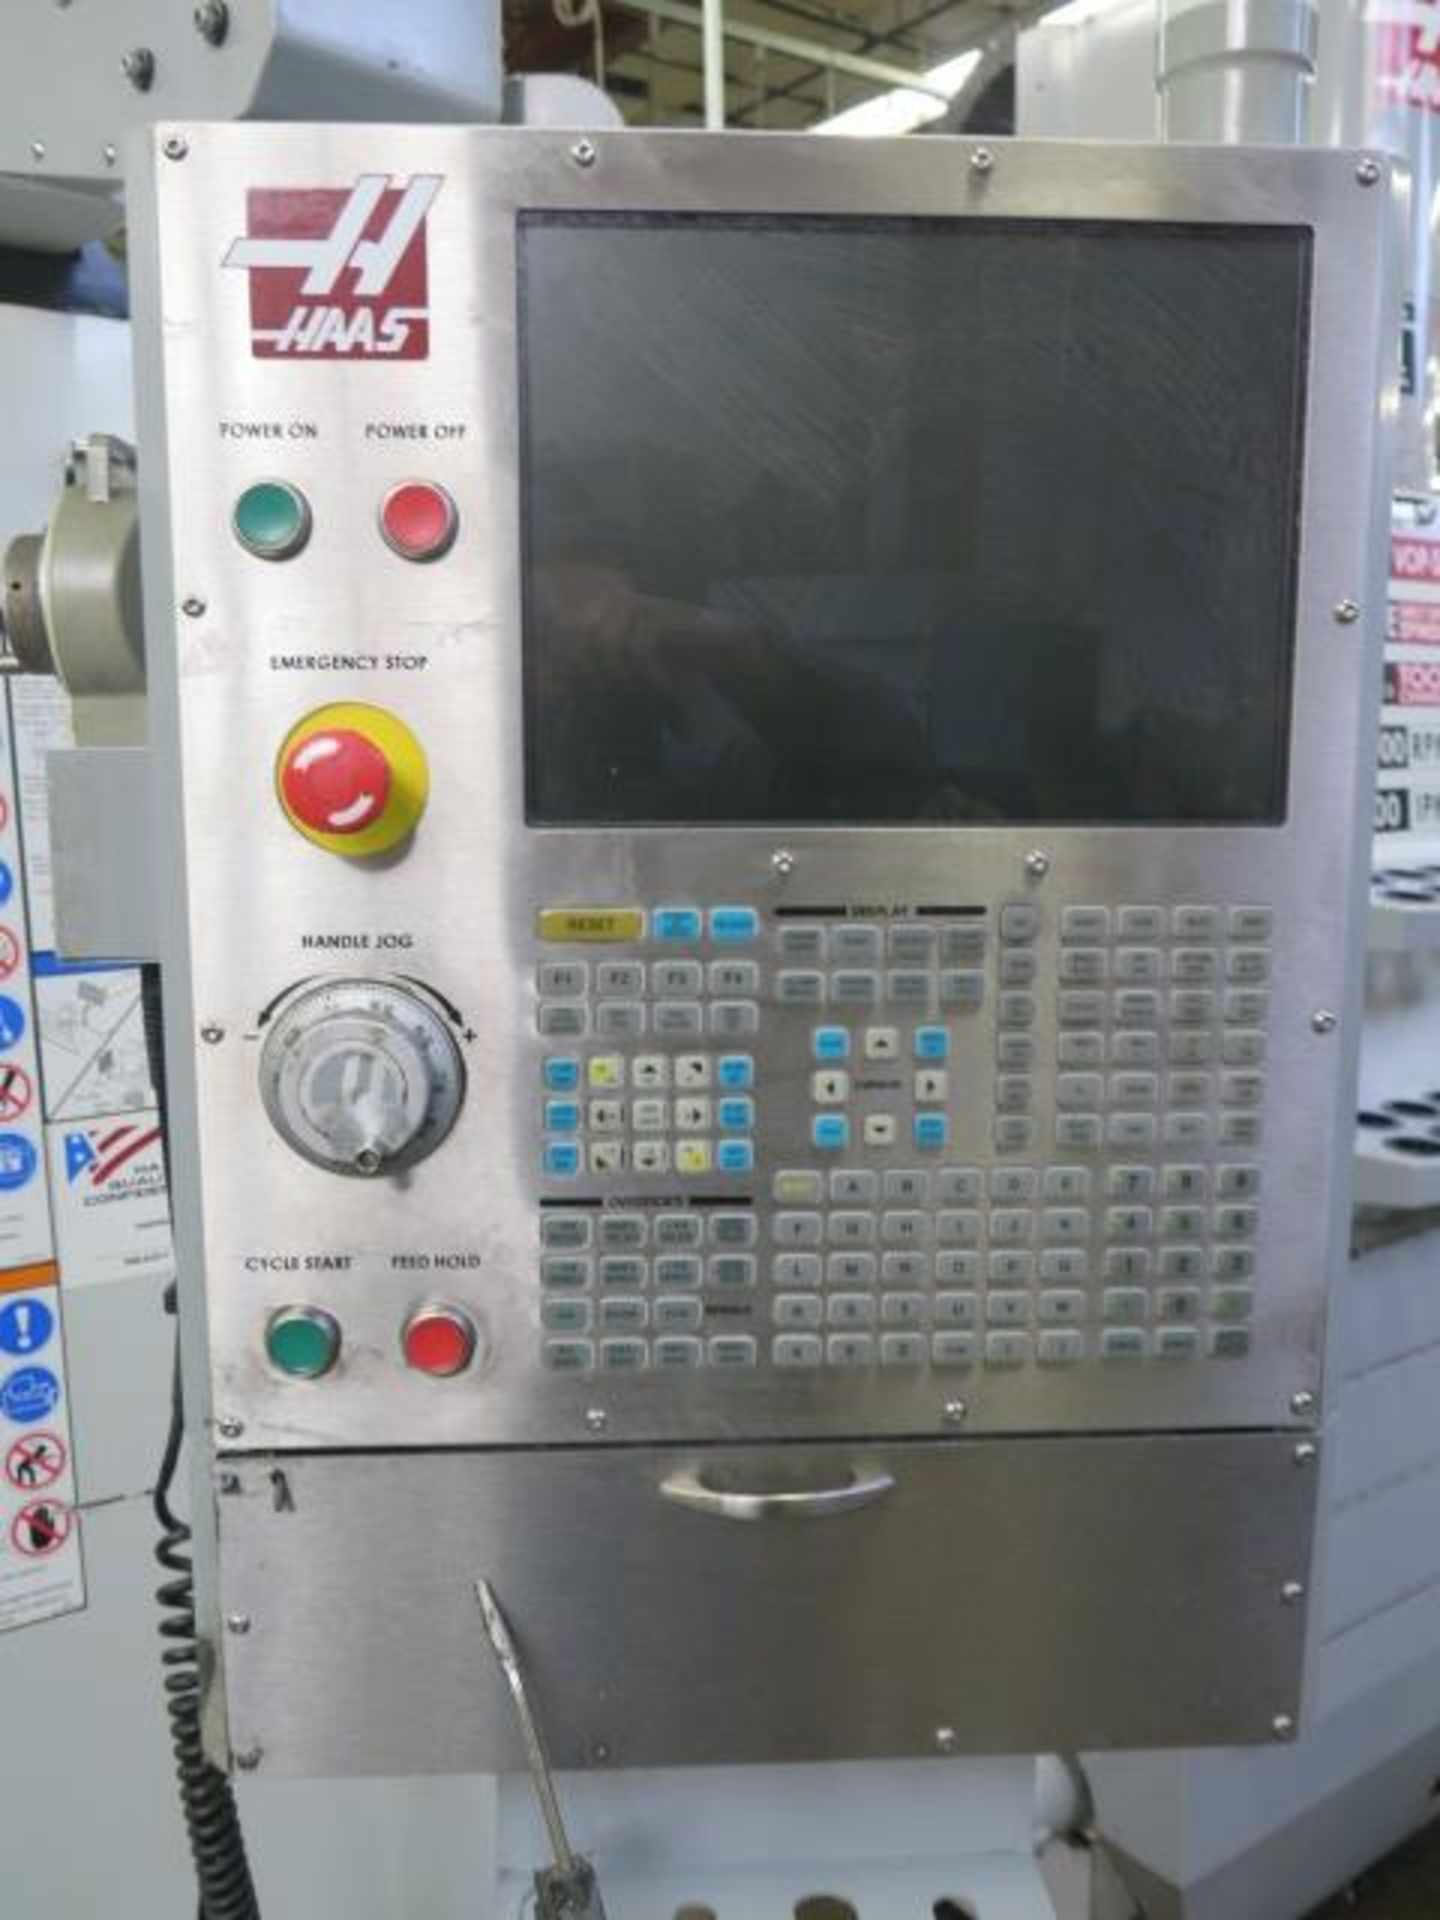 2007 Haas VF-2SSYT 4-Axis CNC VMC s/n 1061412 w/ Haas Controls, Hand Wheel, SOLD AS IS - Image 10 of 20